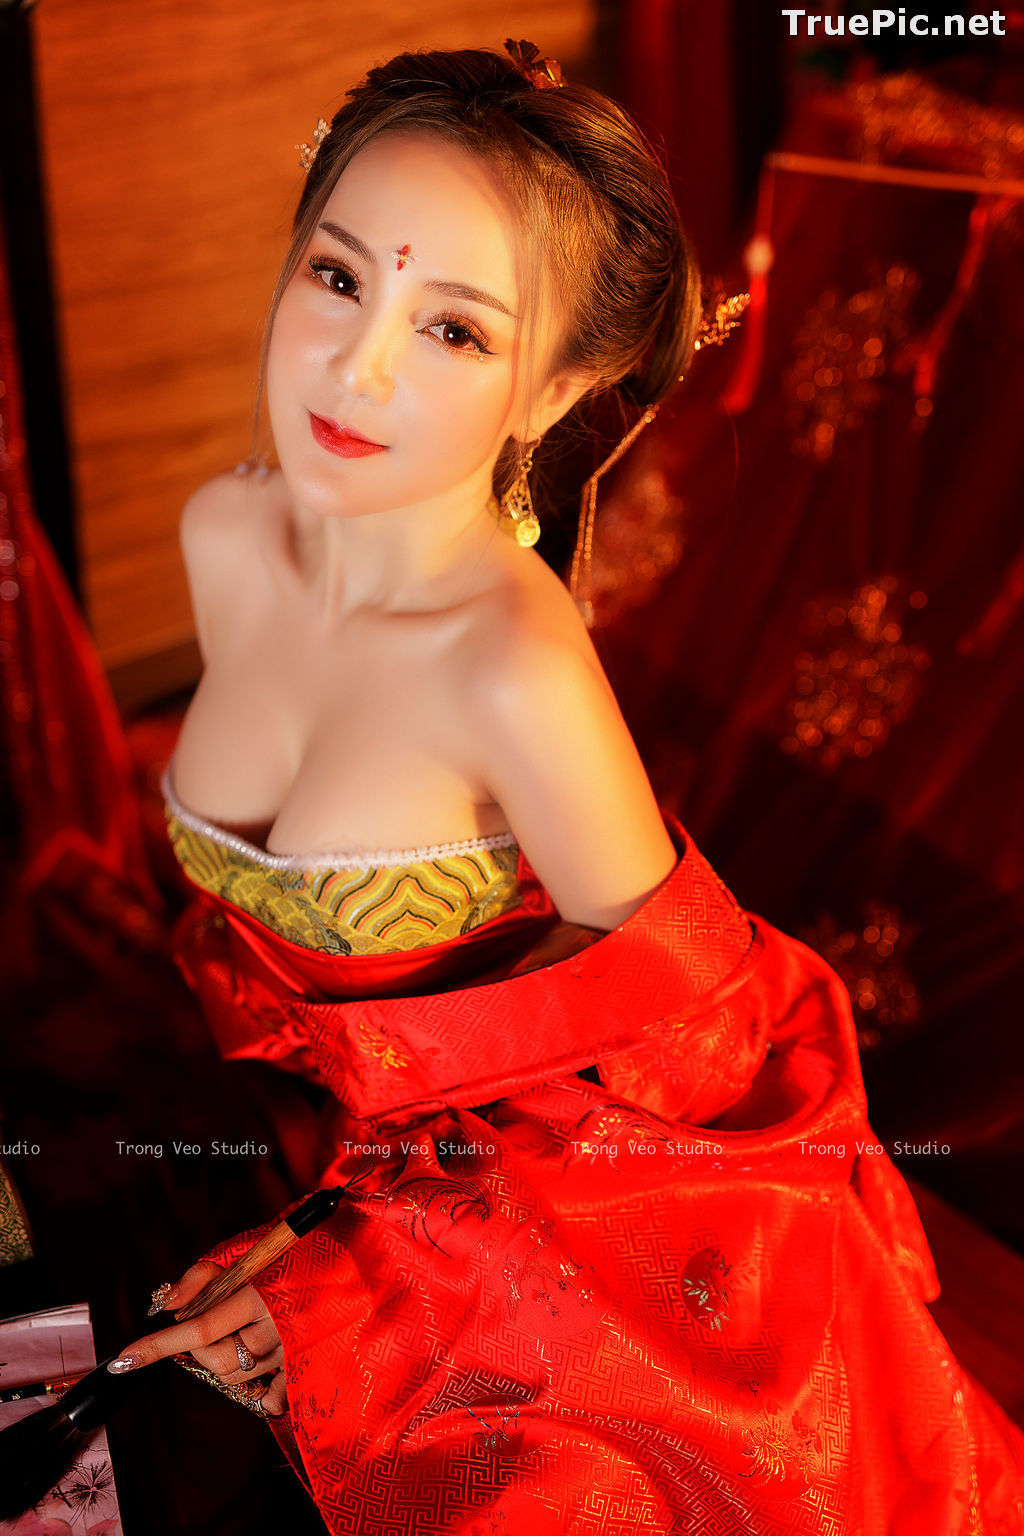 Image The Beauty of Vietnamese Girls – Photo Collection 2020 (#12) - TruePic.net - Picture-19